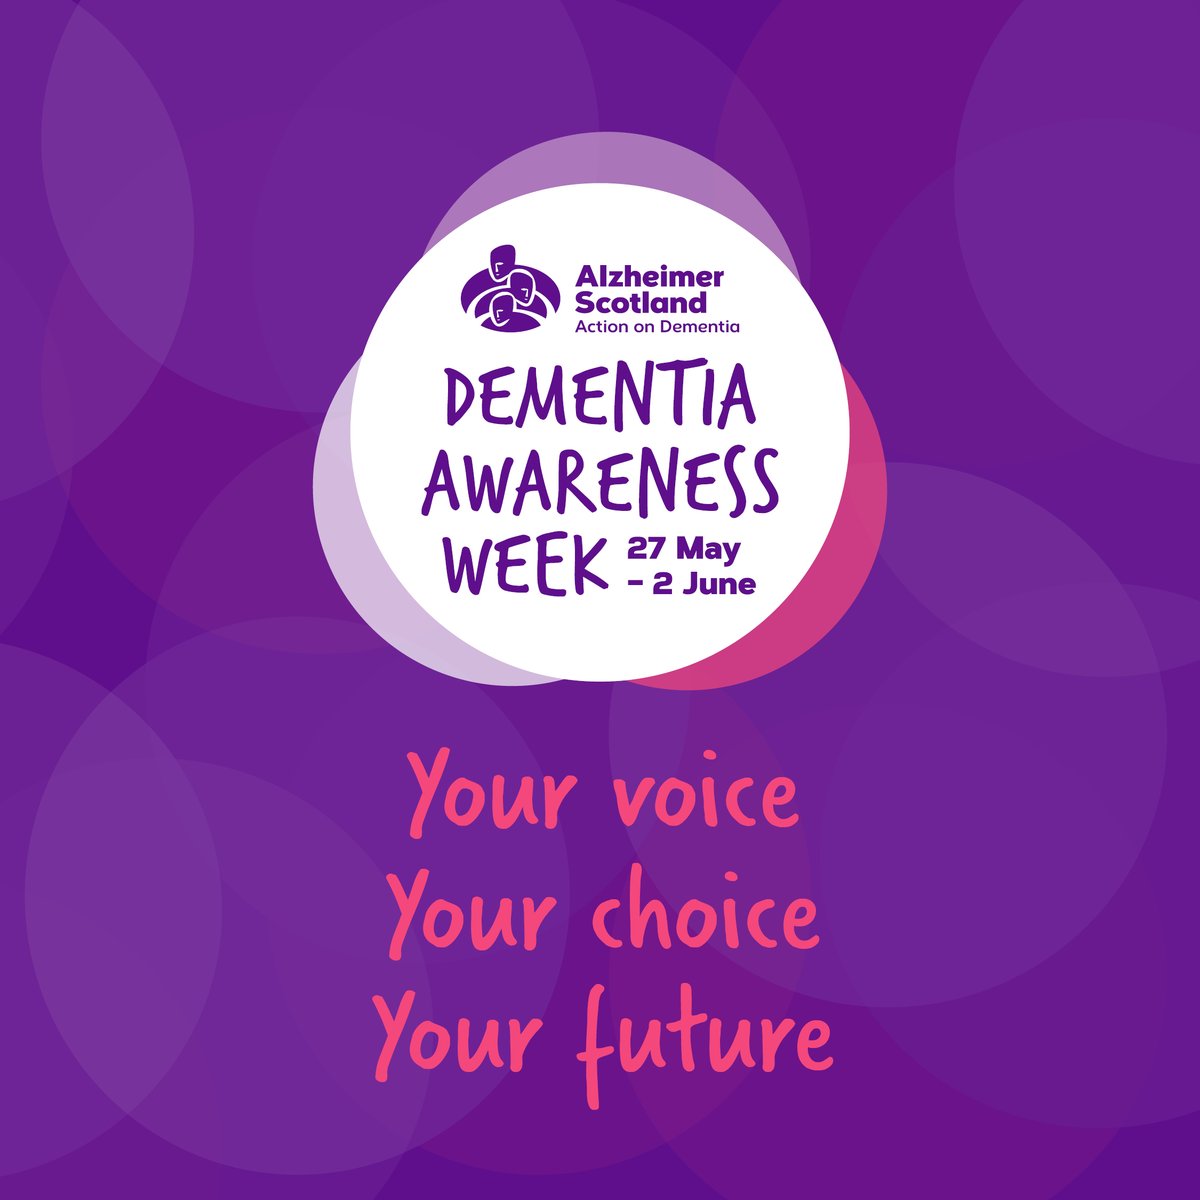 This #DementiaAwarenessWeek our theme is 'Your voice, your choice, your future'. Every person with dementia is different, & so good care will look different for them. People need the power to make choices on what matters to them - now & in the future 👉 pulse.ly/xz6nh4jxan